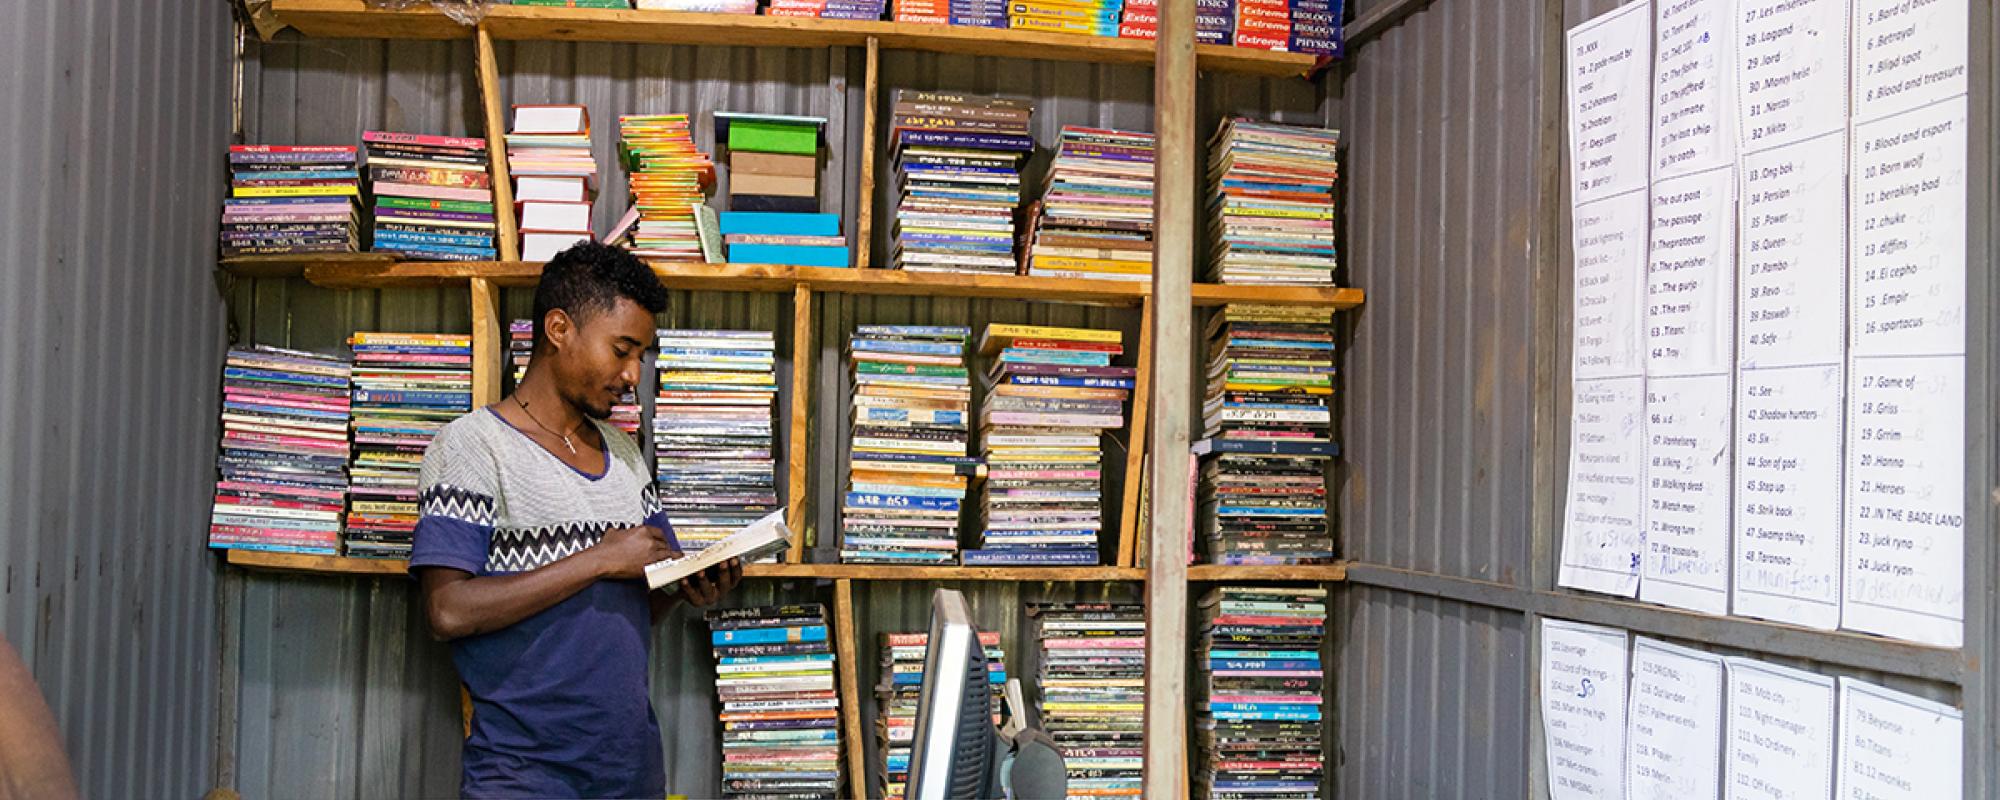 Man reading in book store 